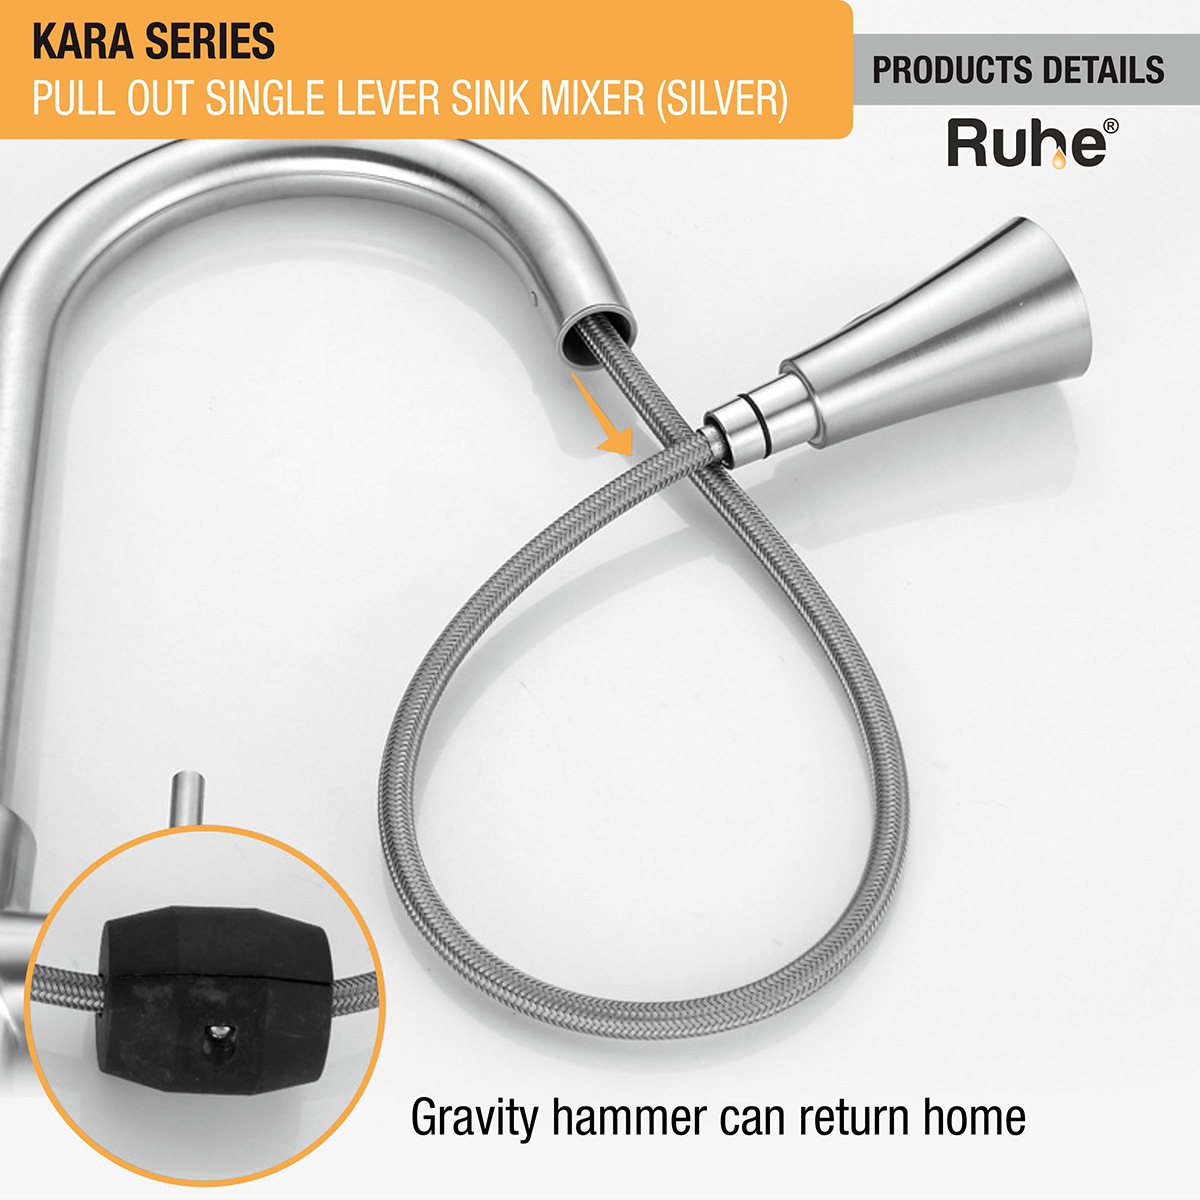 Kara Pull-out Single Lever Table Mount Sink Mixer Faucet with Dual Flow (Silver) 304-Grade SS product details